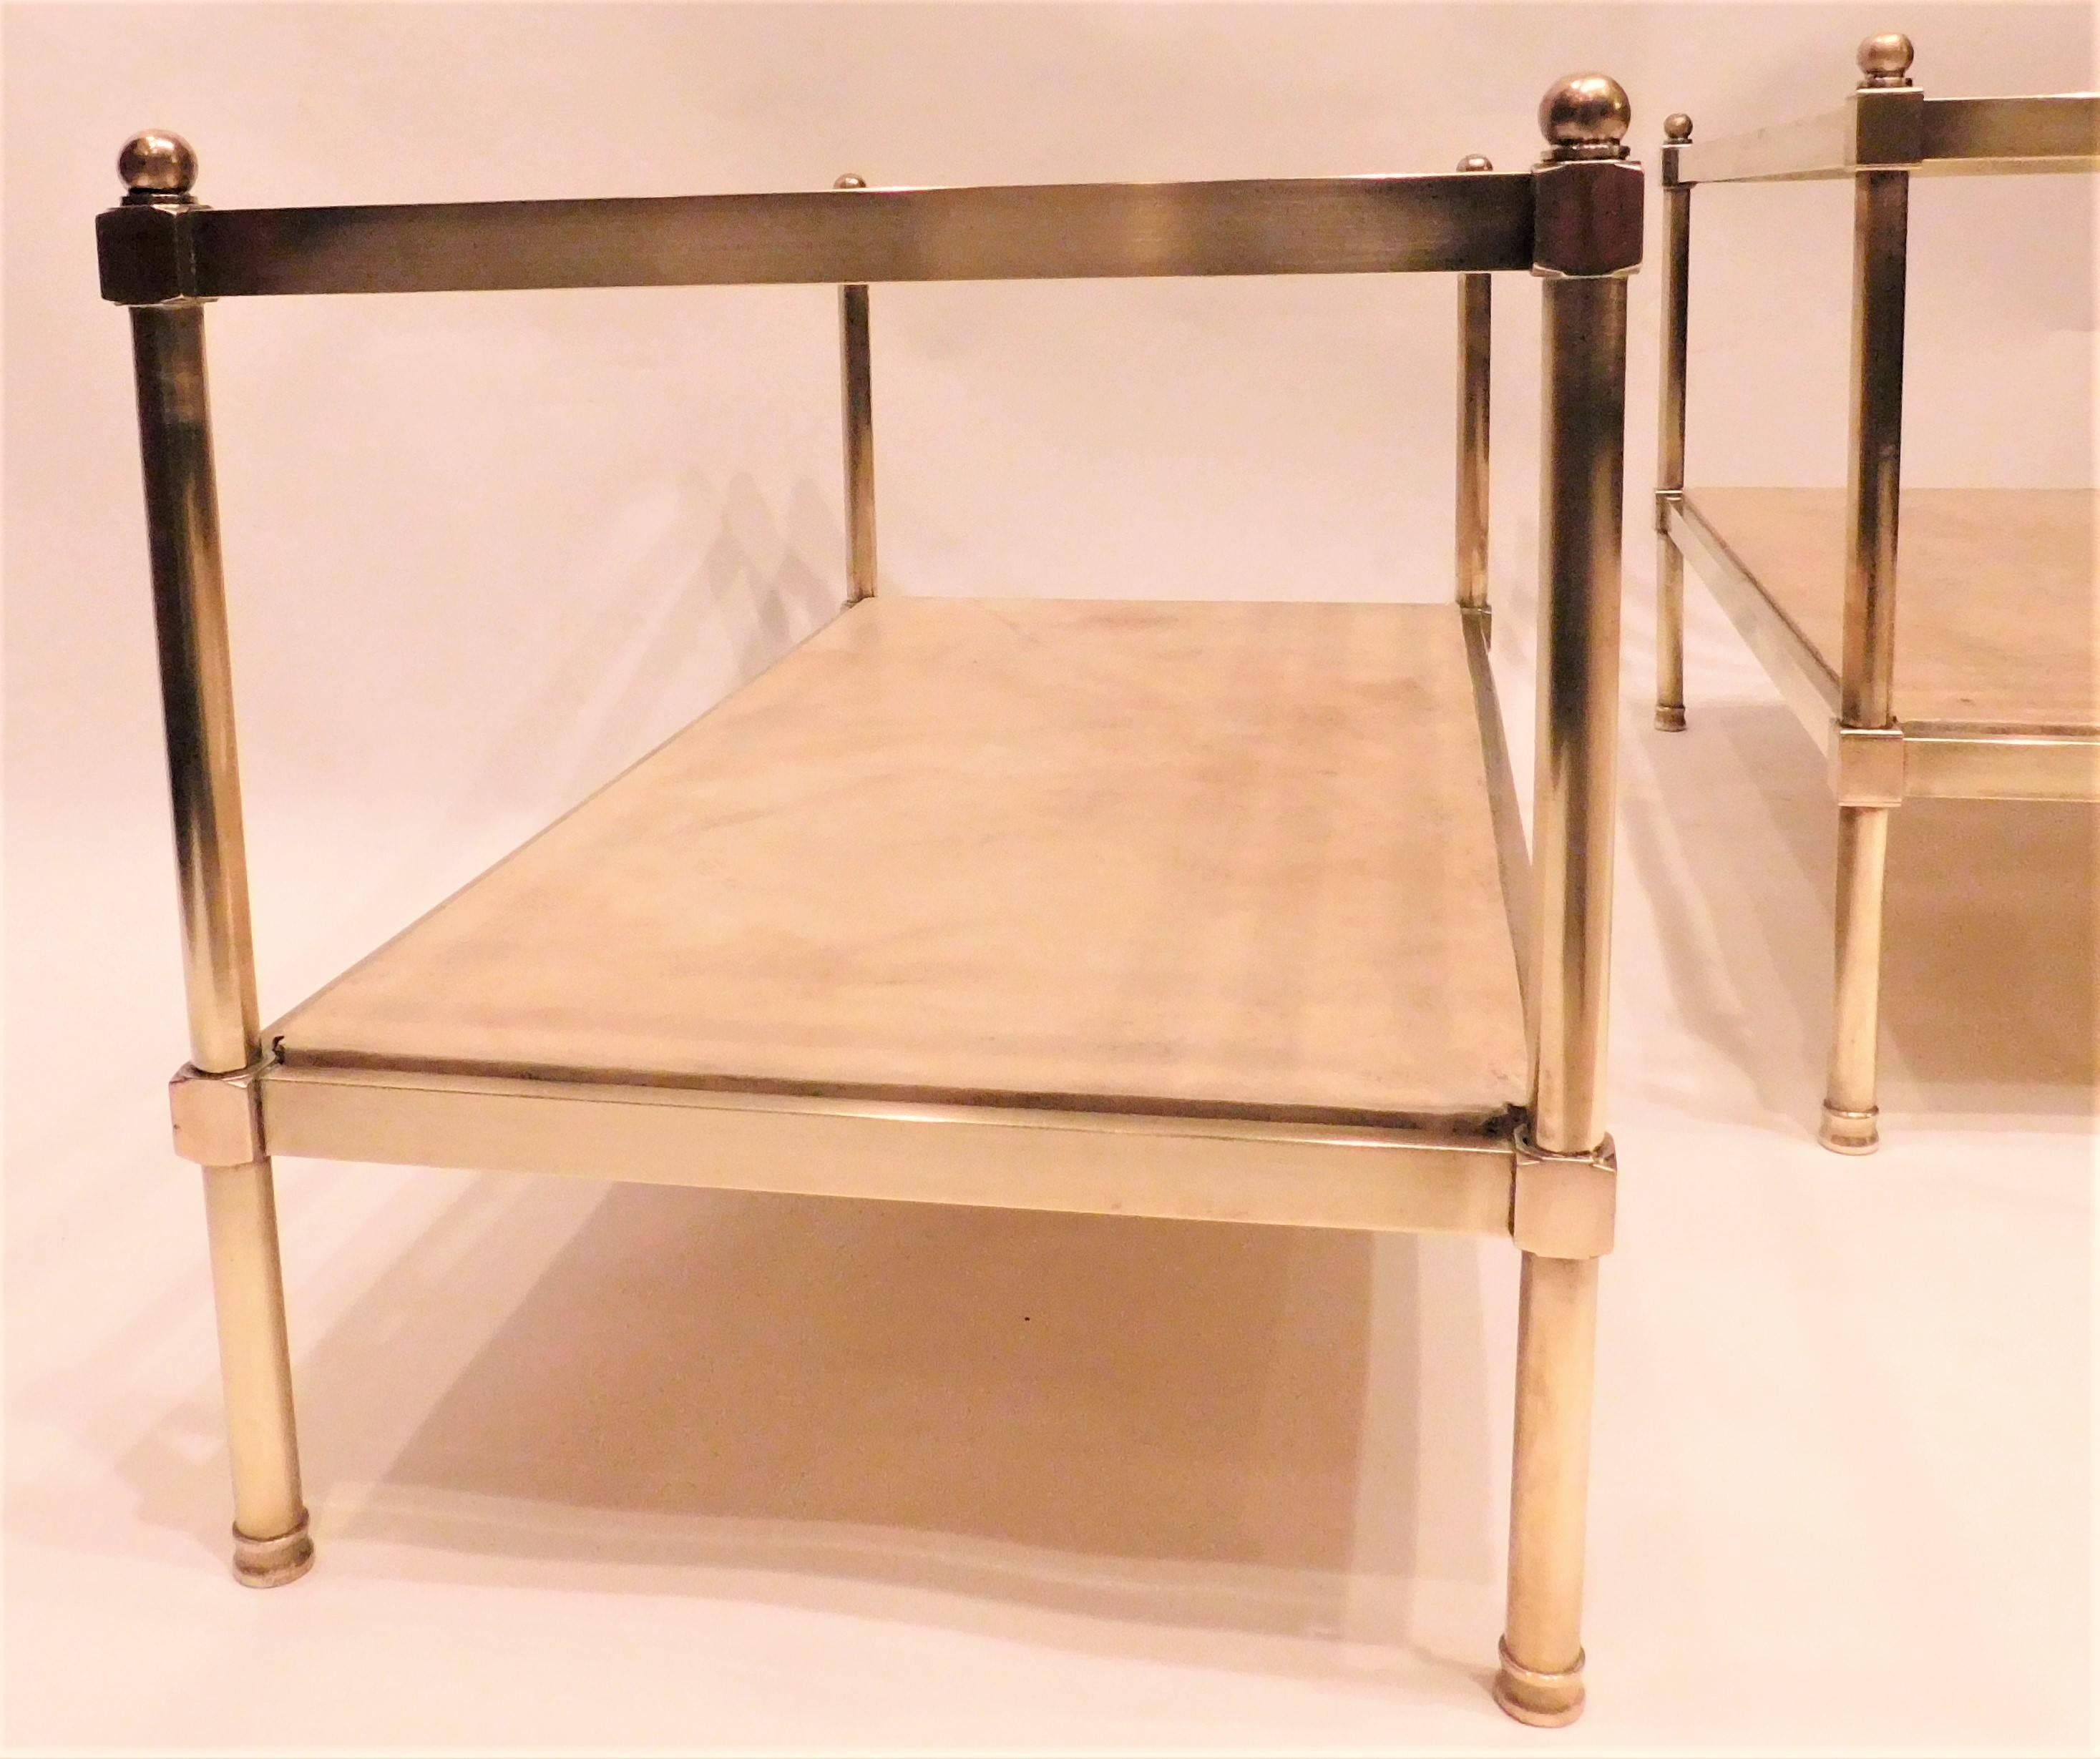 Solid brass with glass tops and parchment lower shelves - neoclassical design. These tables are identical in size except one is one inch shorter than the other (+/- 1/2 inch from height shown). There are some other slight variations between them --